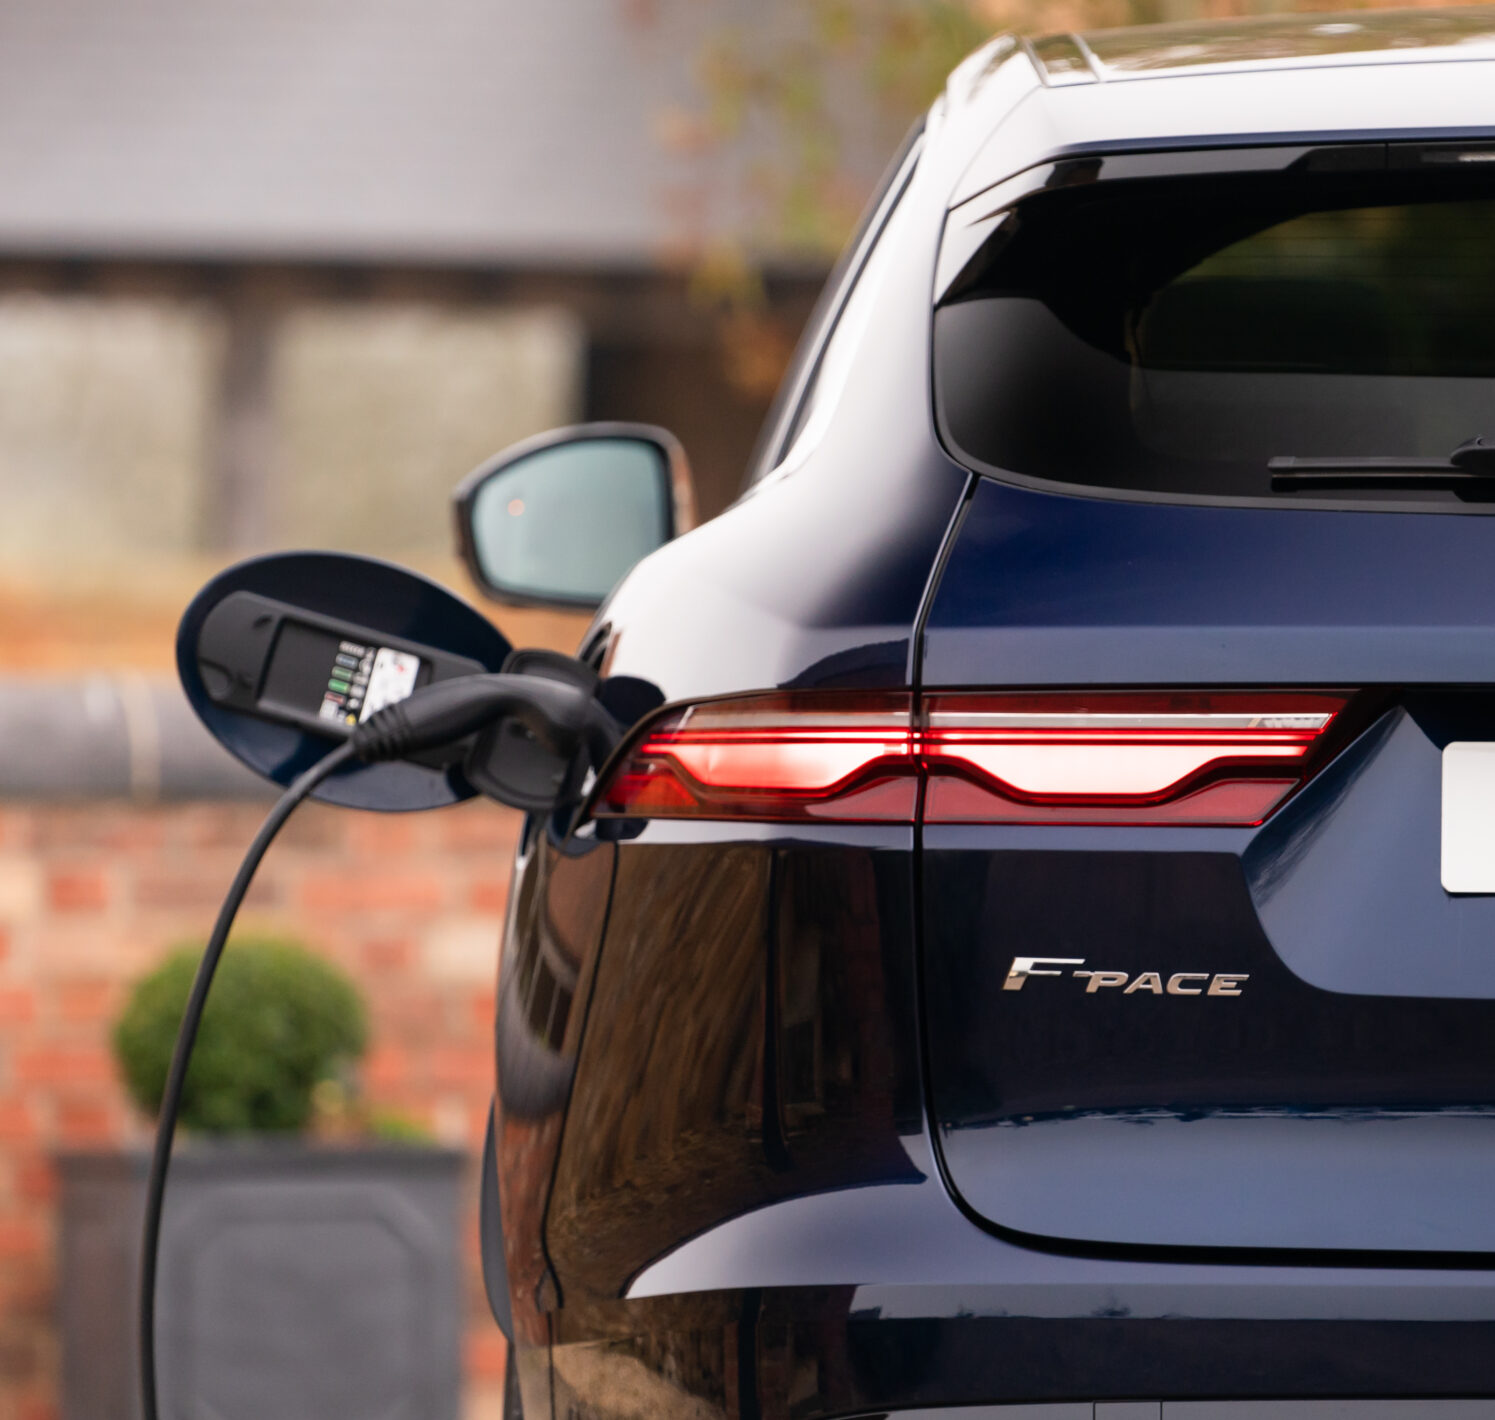 https://autofilter.sk/assets/images/f-pace-phev/gallery/Jag_F-PACE_PHEV_21MY_Portofino_Blue_Charging_Portrait_100321_5804.jpg - obrazok